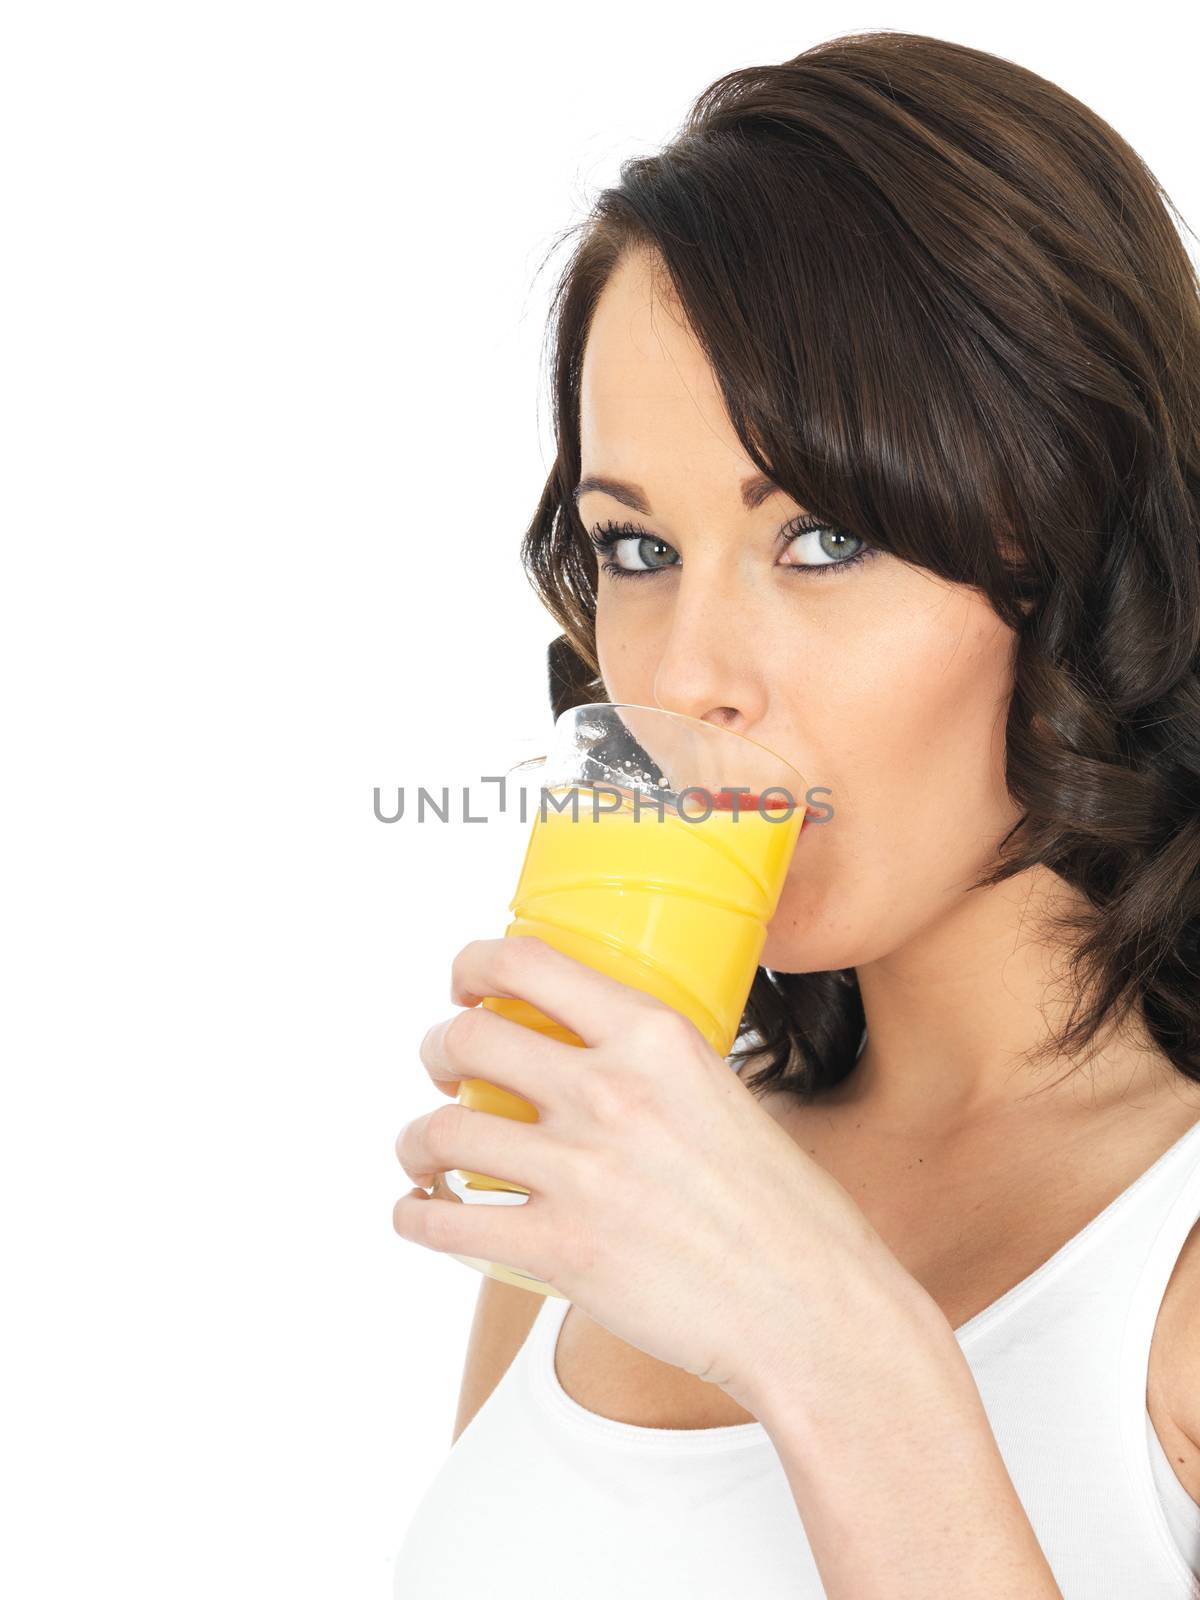 Young Woman Drinking Orange Juice by Whiteboxmedia